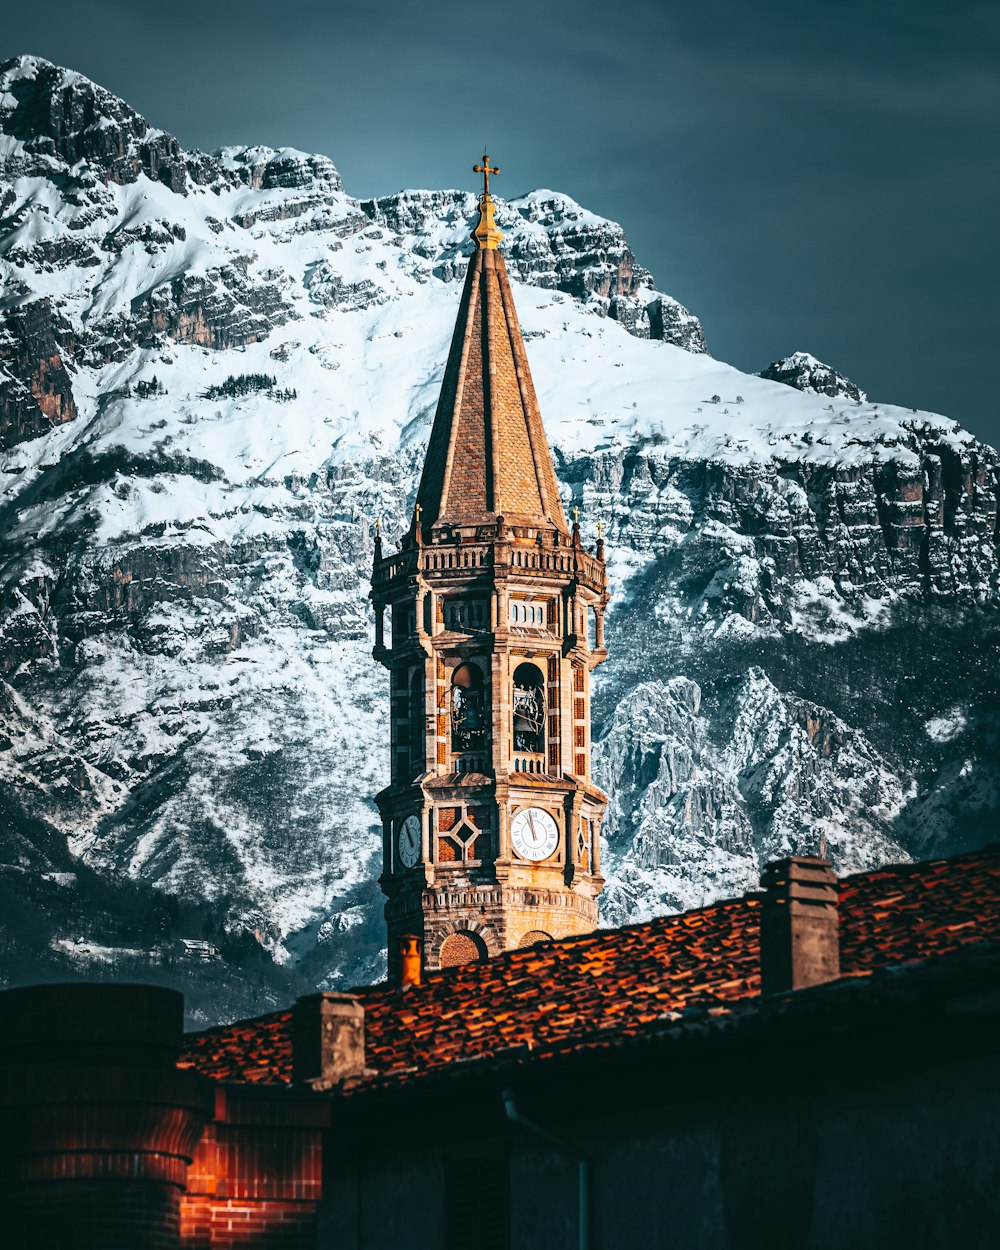 a clock tower on top of a building with a mountain in the background